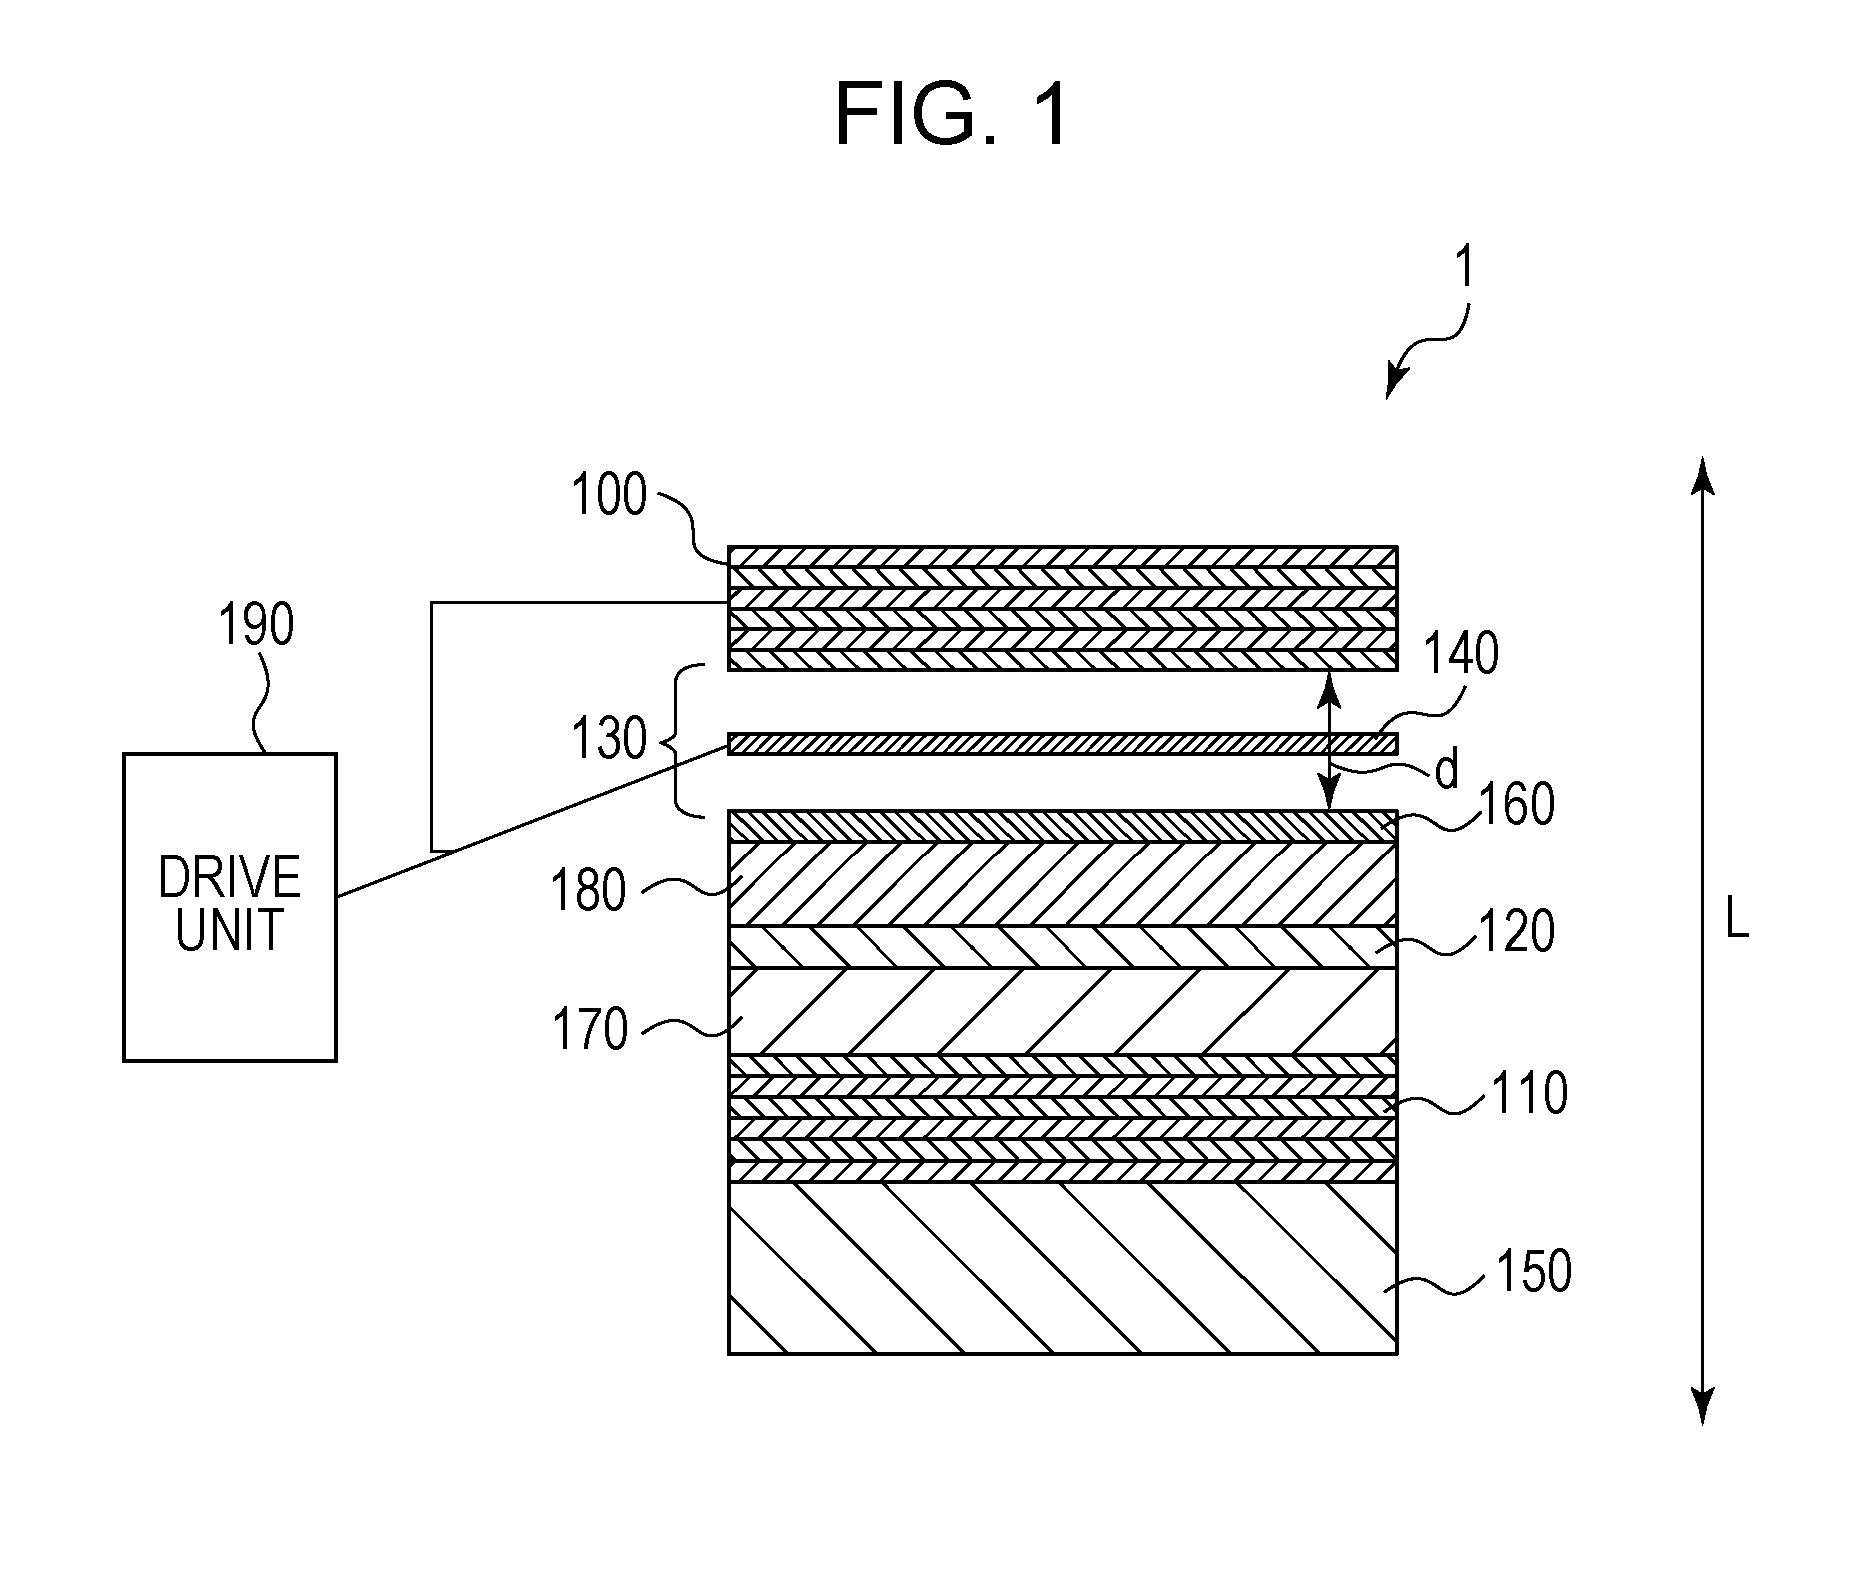 Surface emitting laser and optical coherence tomography using the surface emitting laser